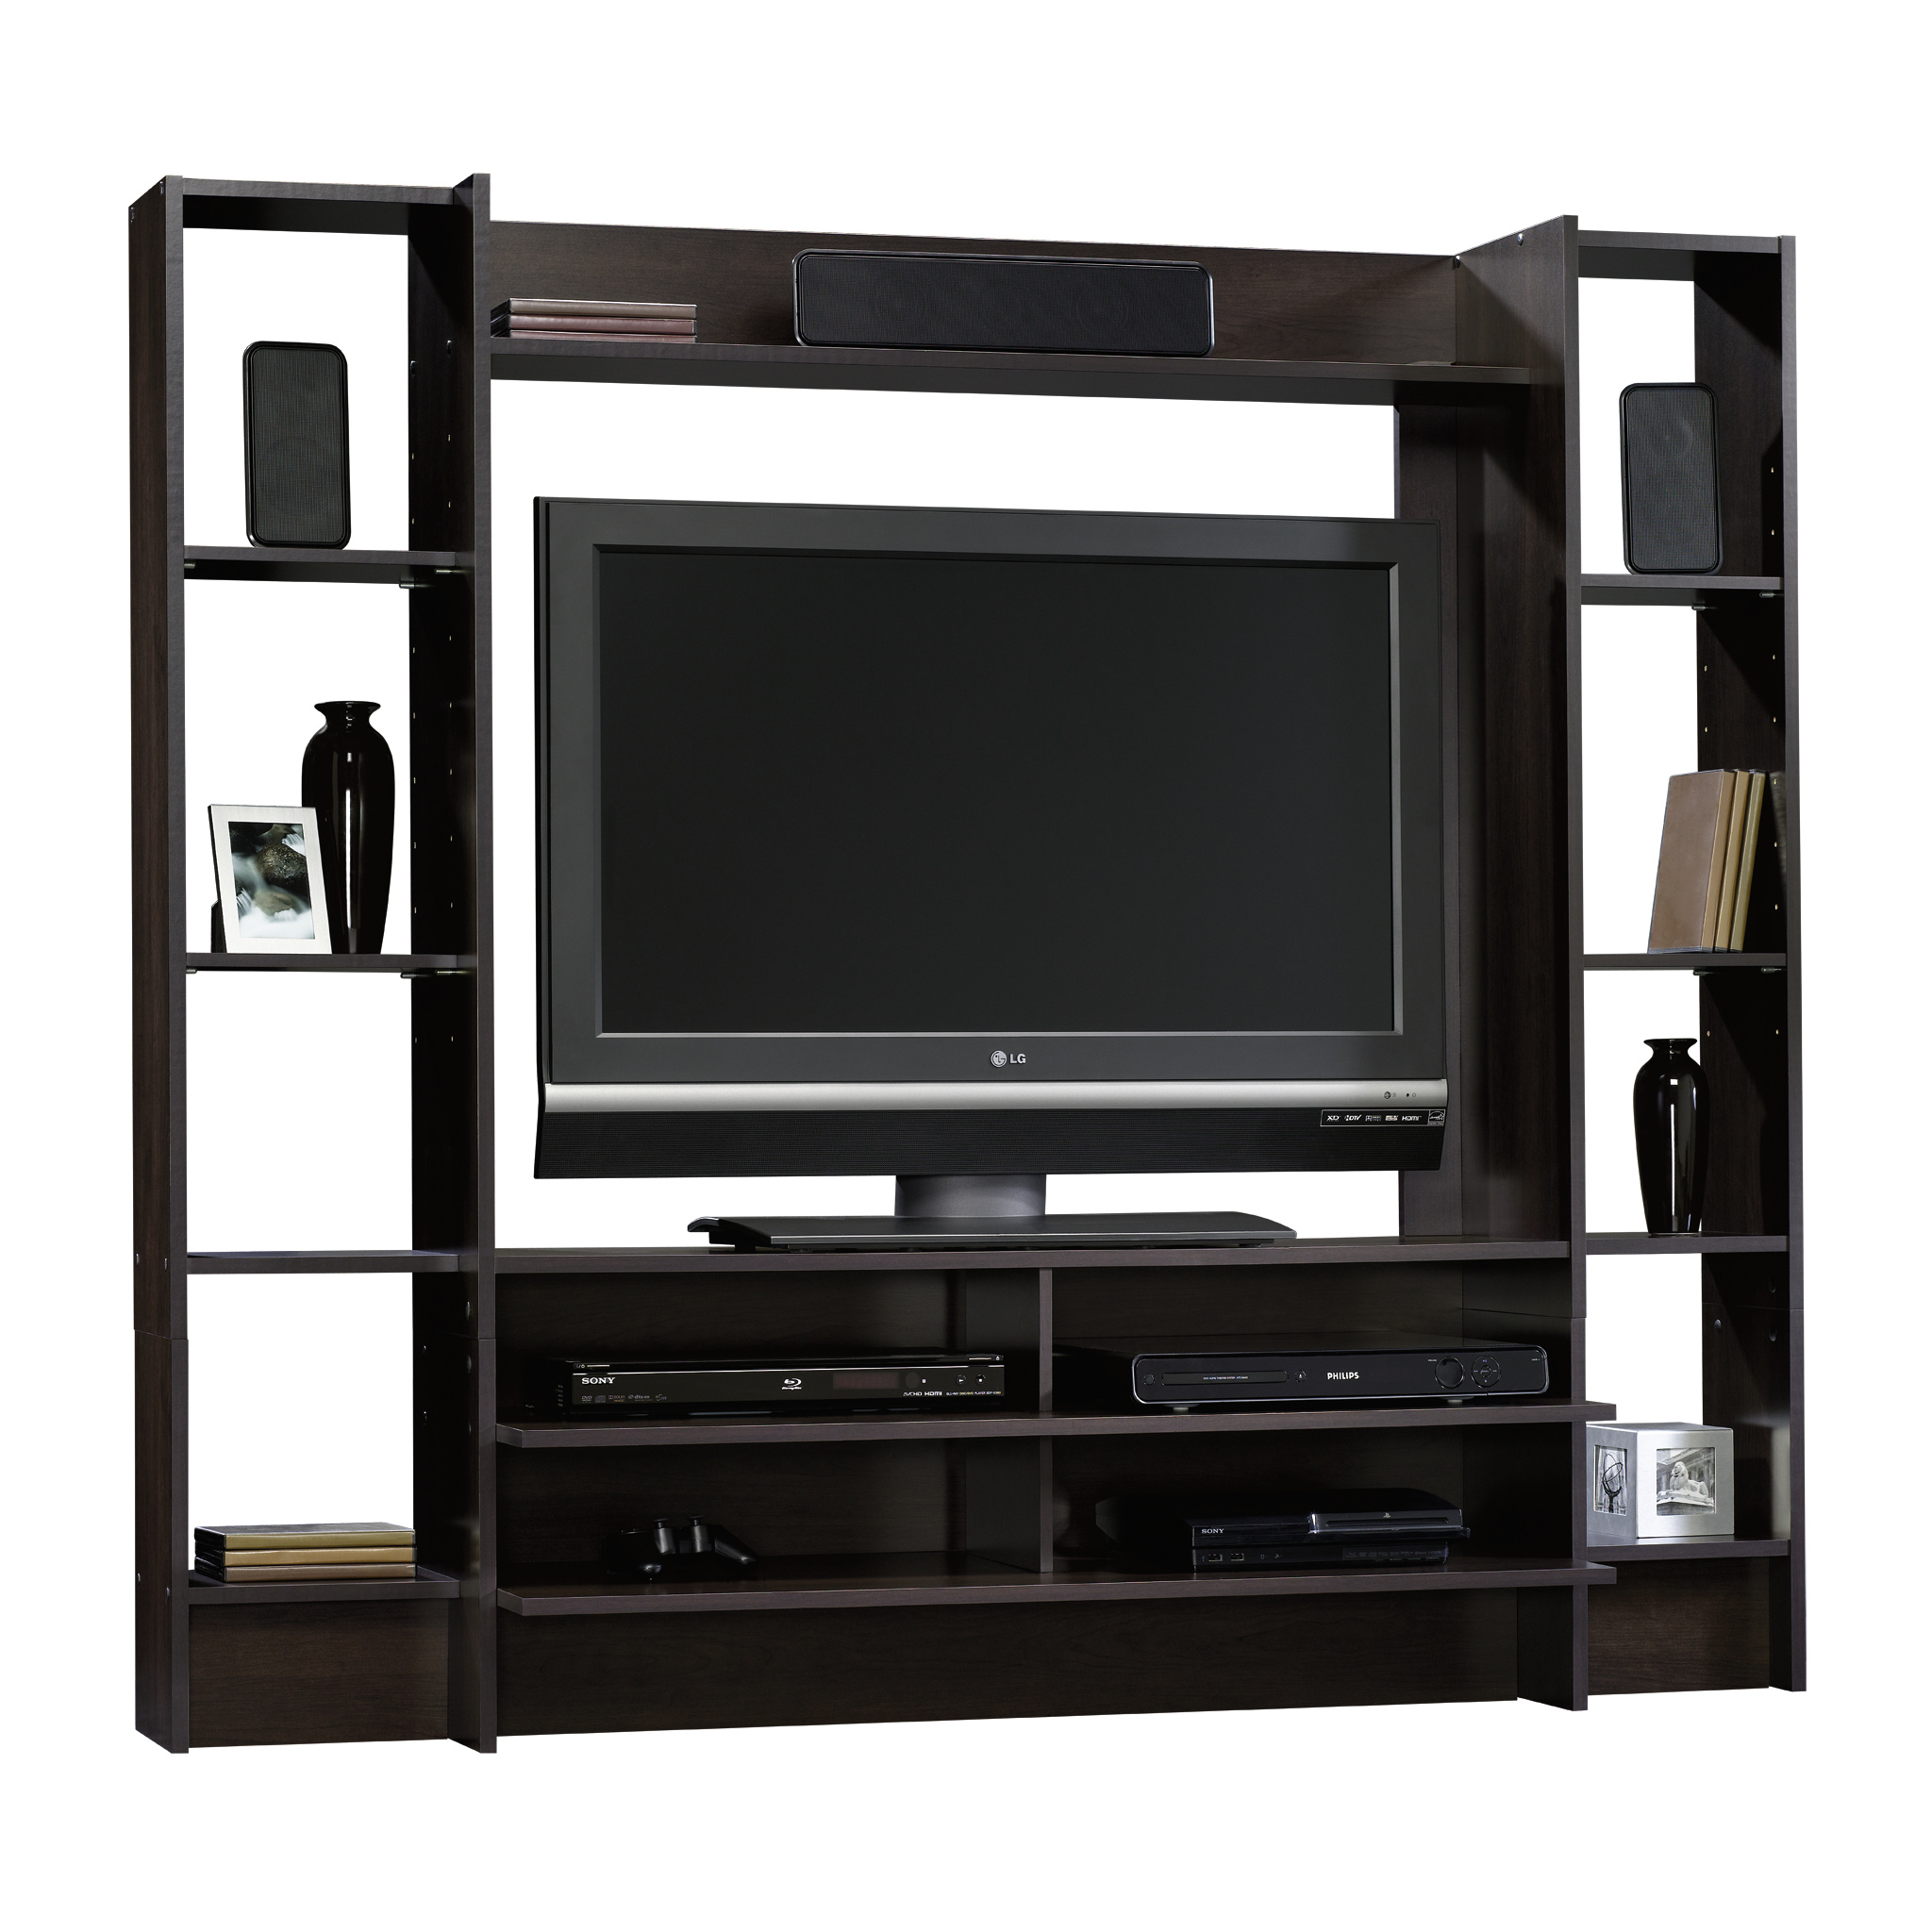 Sauder Beginnings Entertainment Wall System for TVs up to 42", Cinnamon Cherry Finish - image 2 of 4